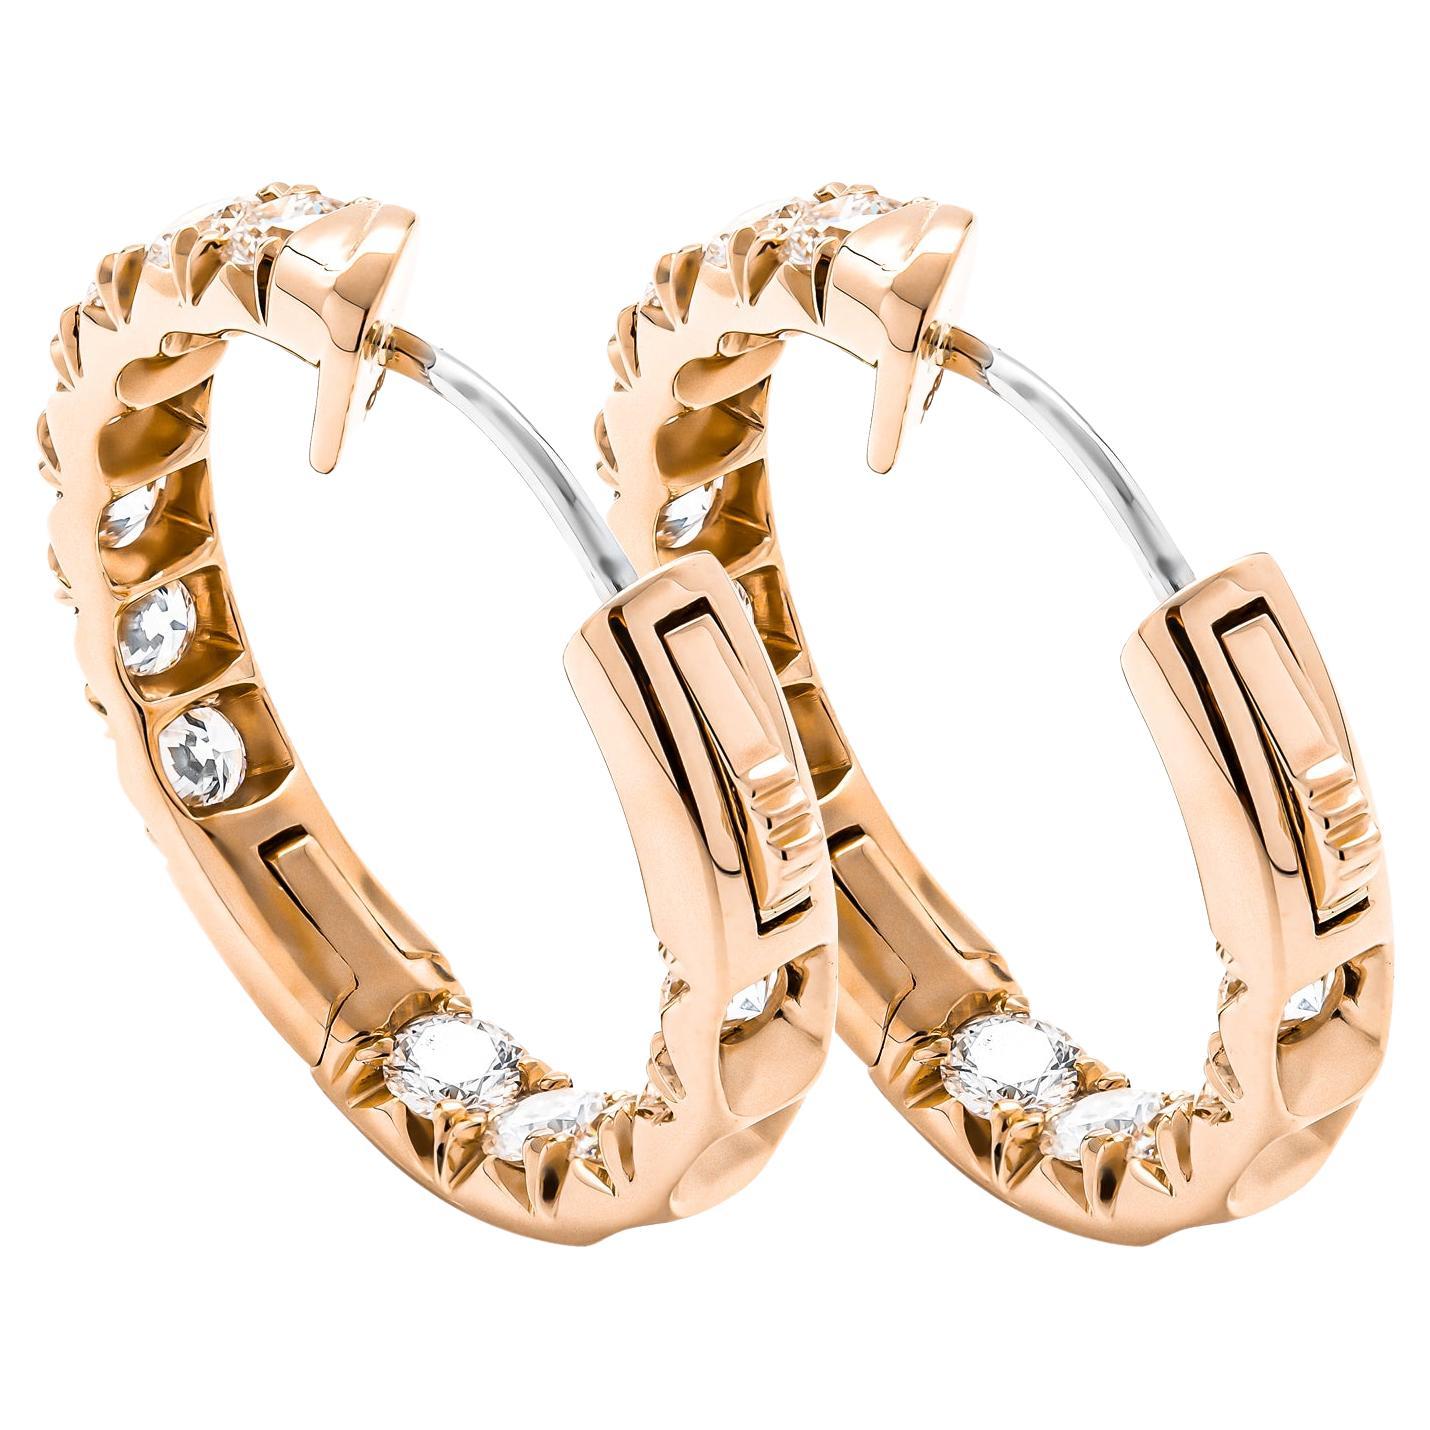 Diamond Hoop Earrings in 14K Rose Gold 
With 24 white diamond 3.3mm each stone D/E/F color and VS clarity, totaling 3.5ct 
Hoop diameter: 22mm
Thickness: 4.3mm 
Comes in box, appraisal available upon request 
Retail: 18,000$